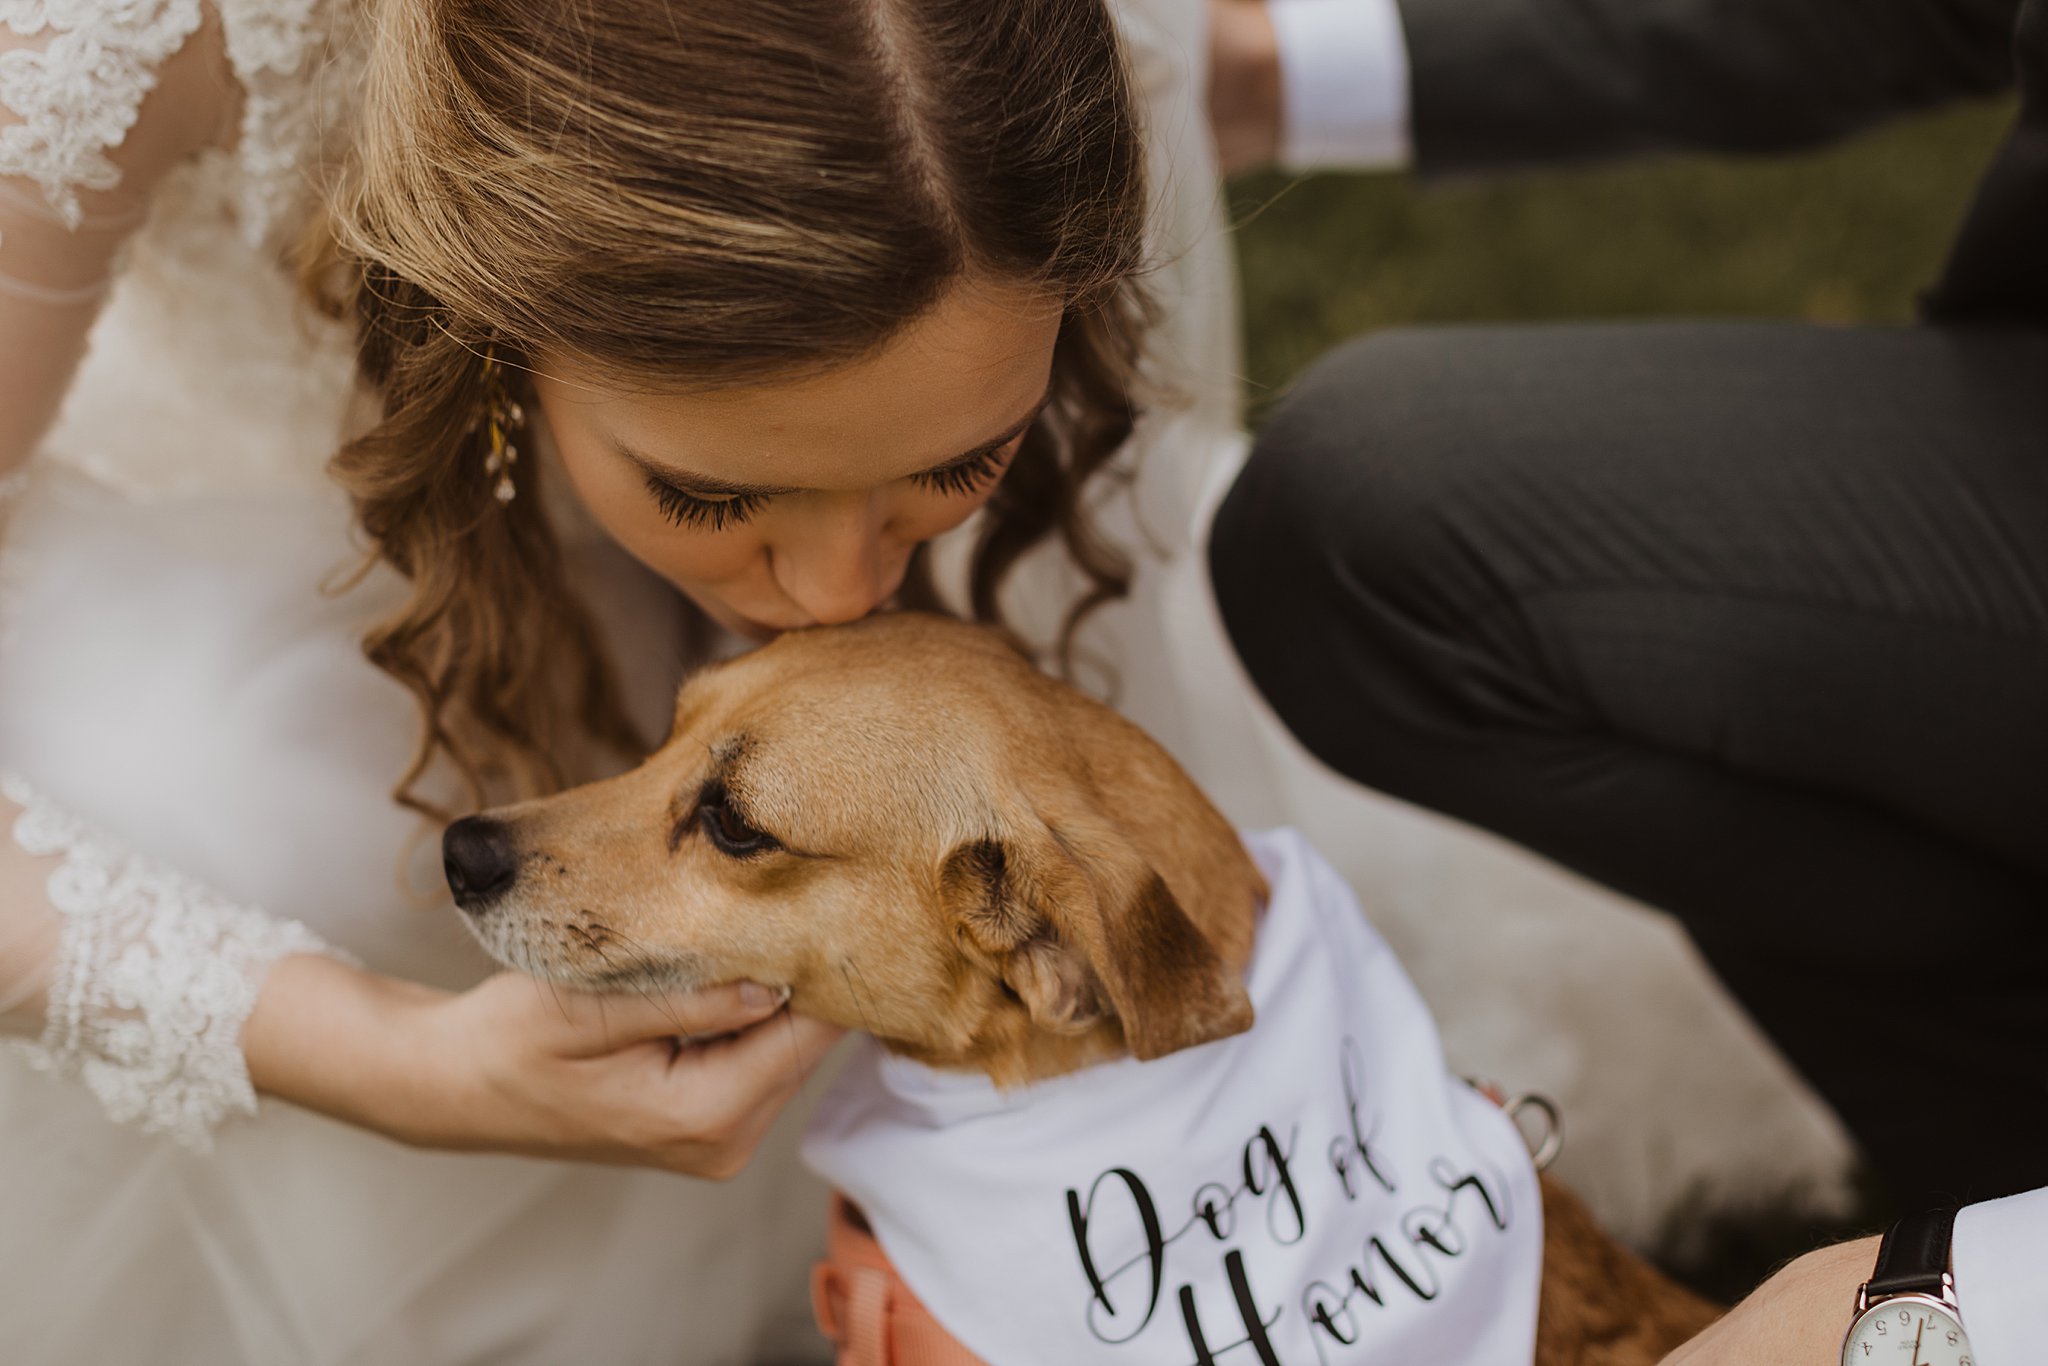 Bride and Groom and Dog of Honor